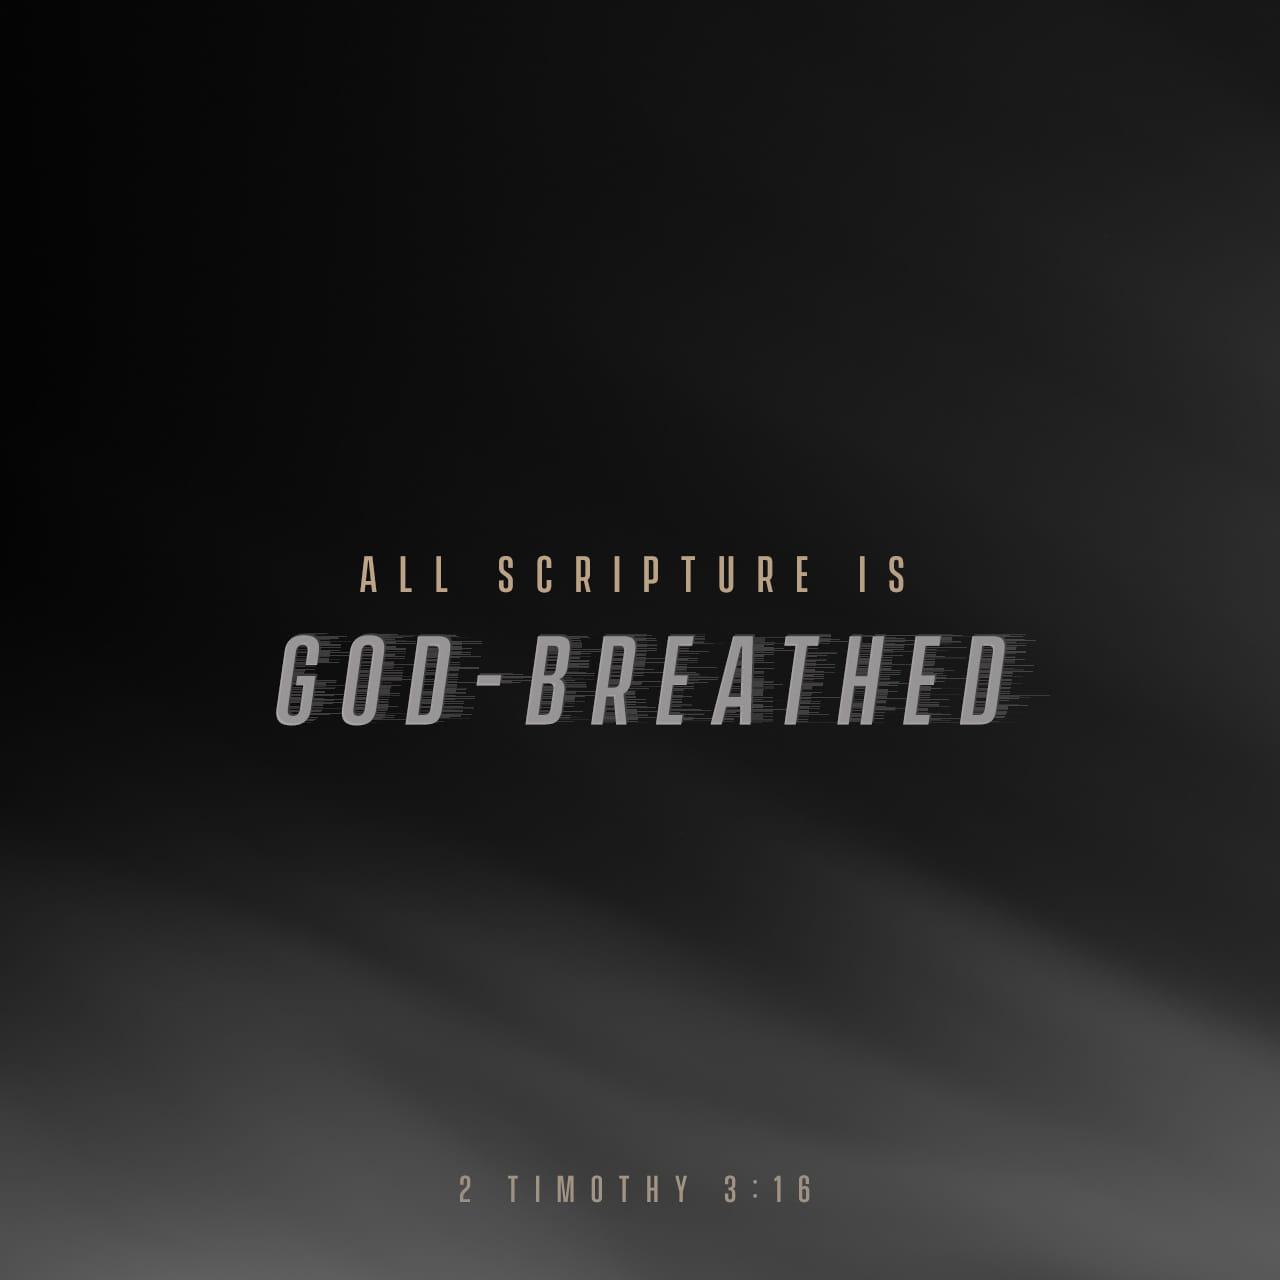 Bible Verse of the Day - day 81 - image 13764 (2 Timothy 3:16-17)